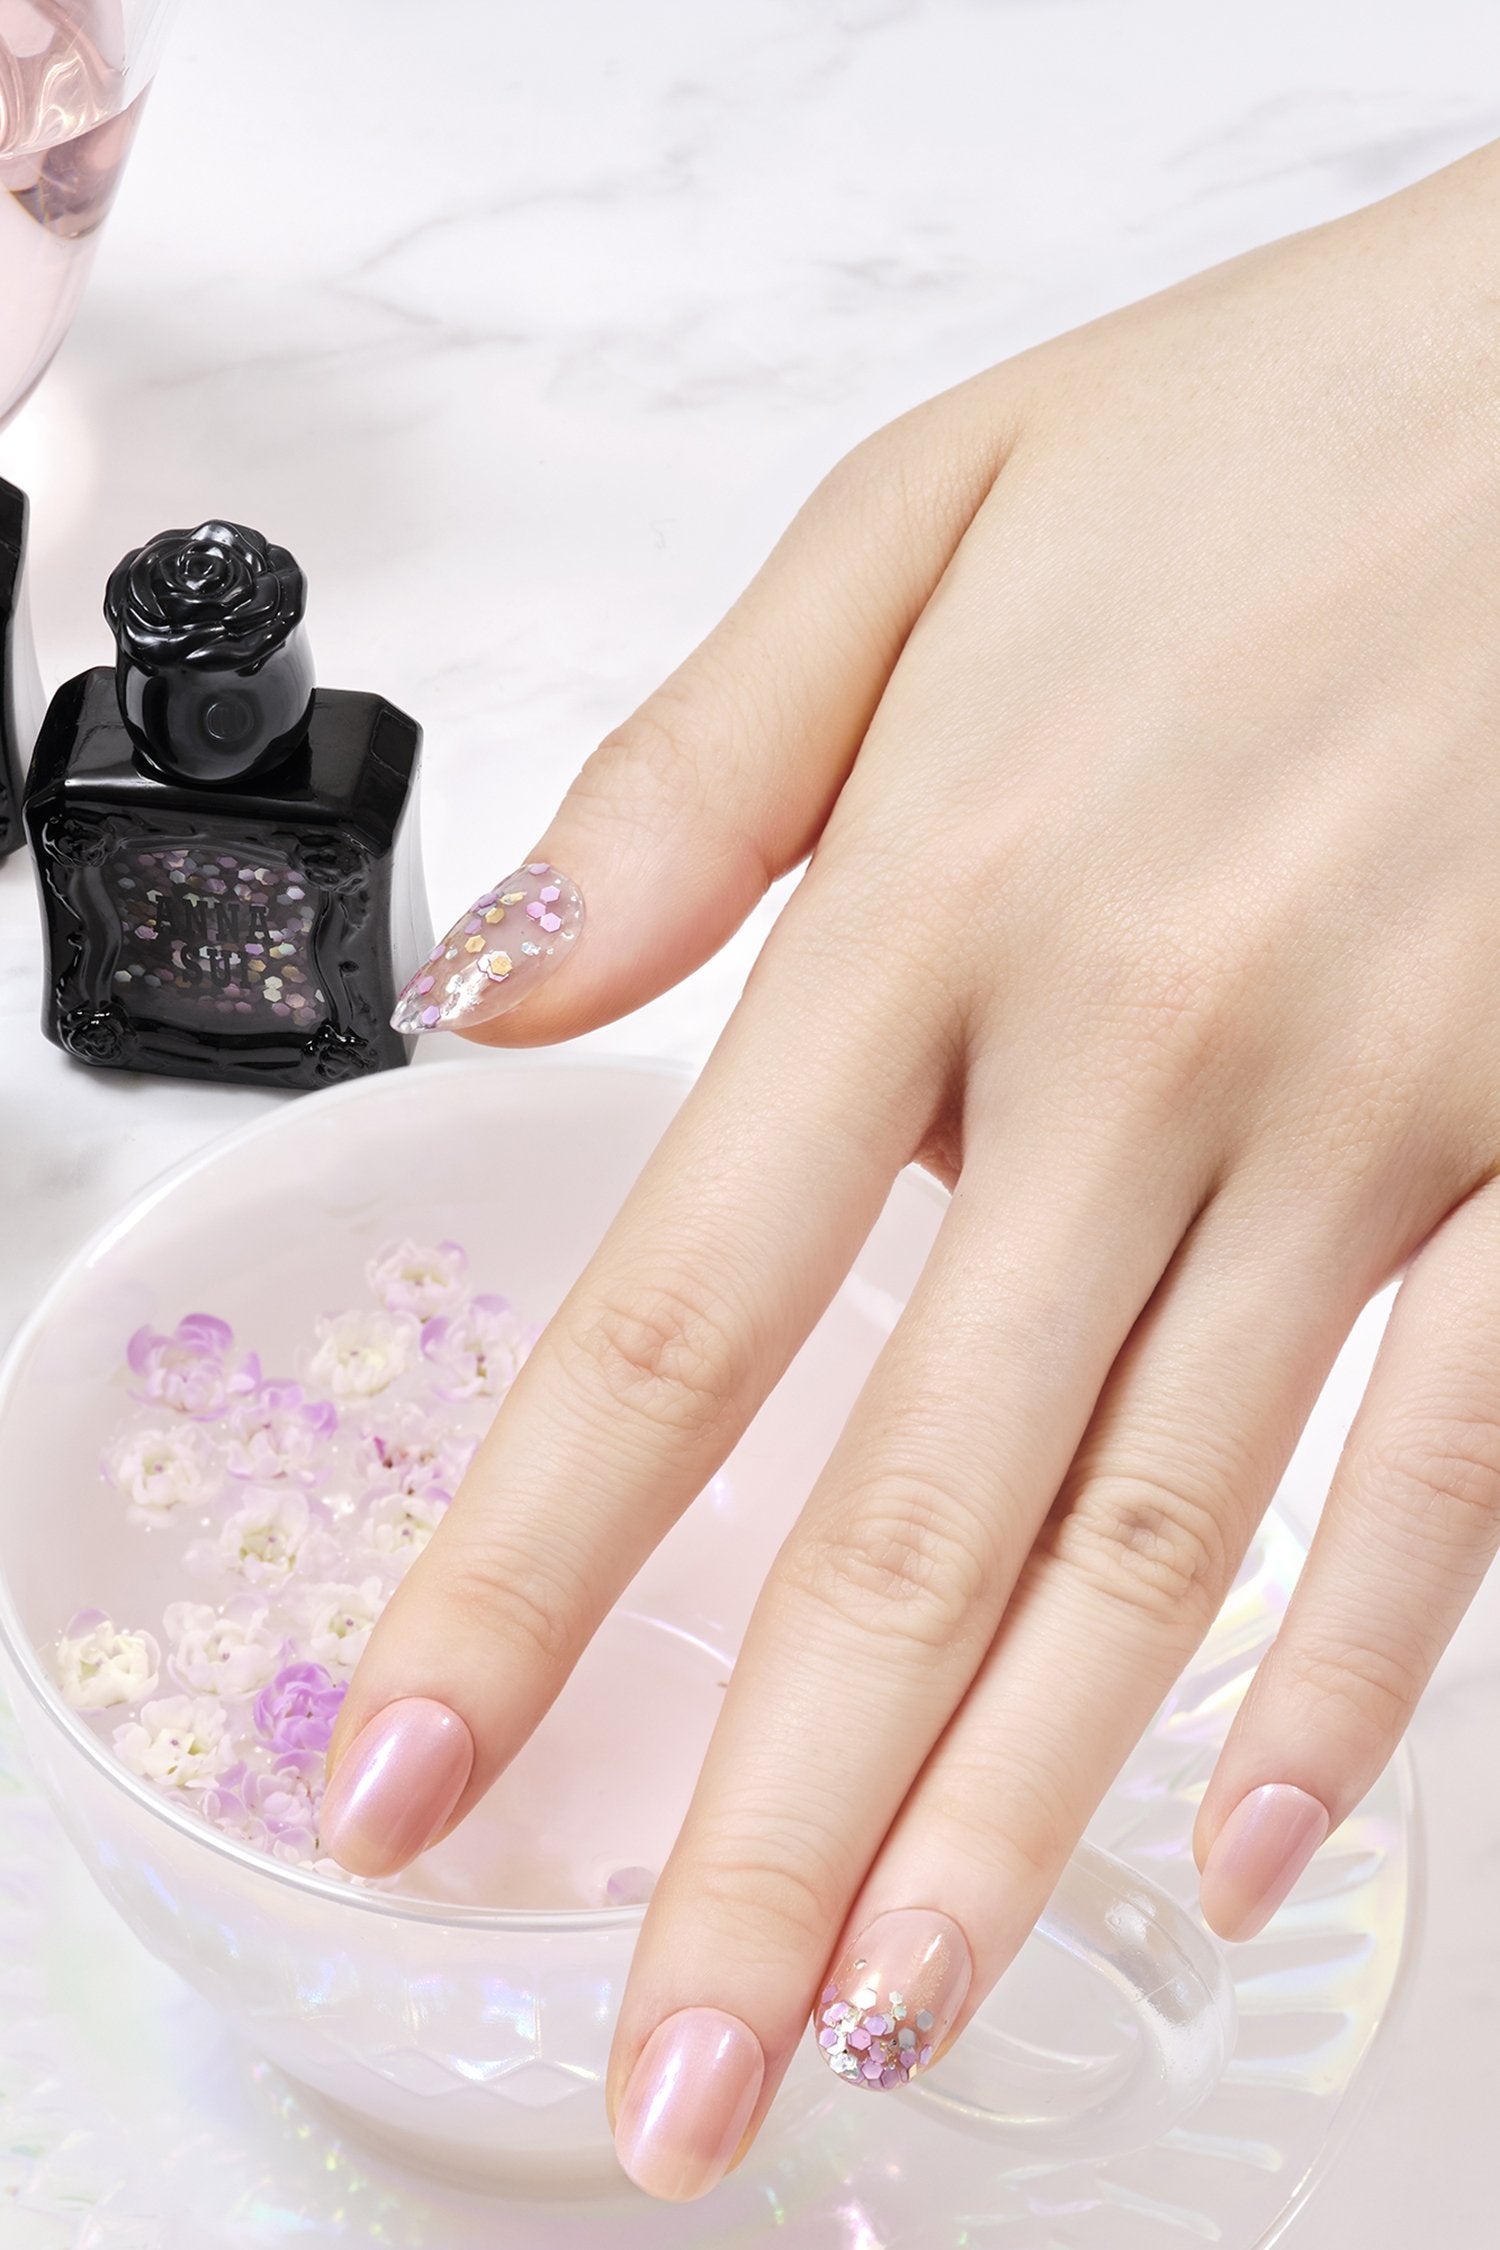 Hand with Nail Polish SHINY PINK with nail topper MERMAID PURPLE, black container with product